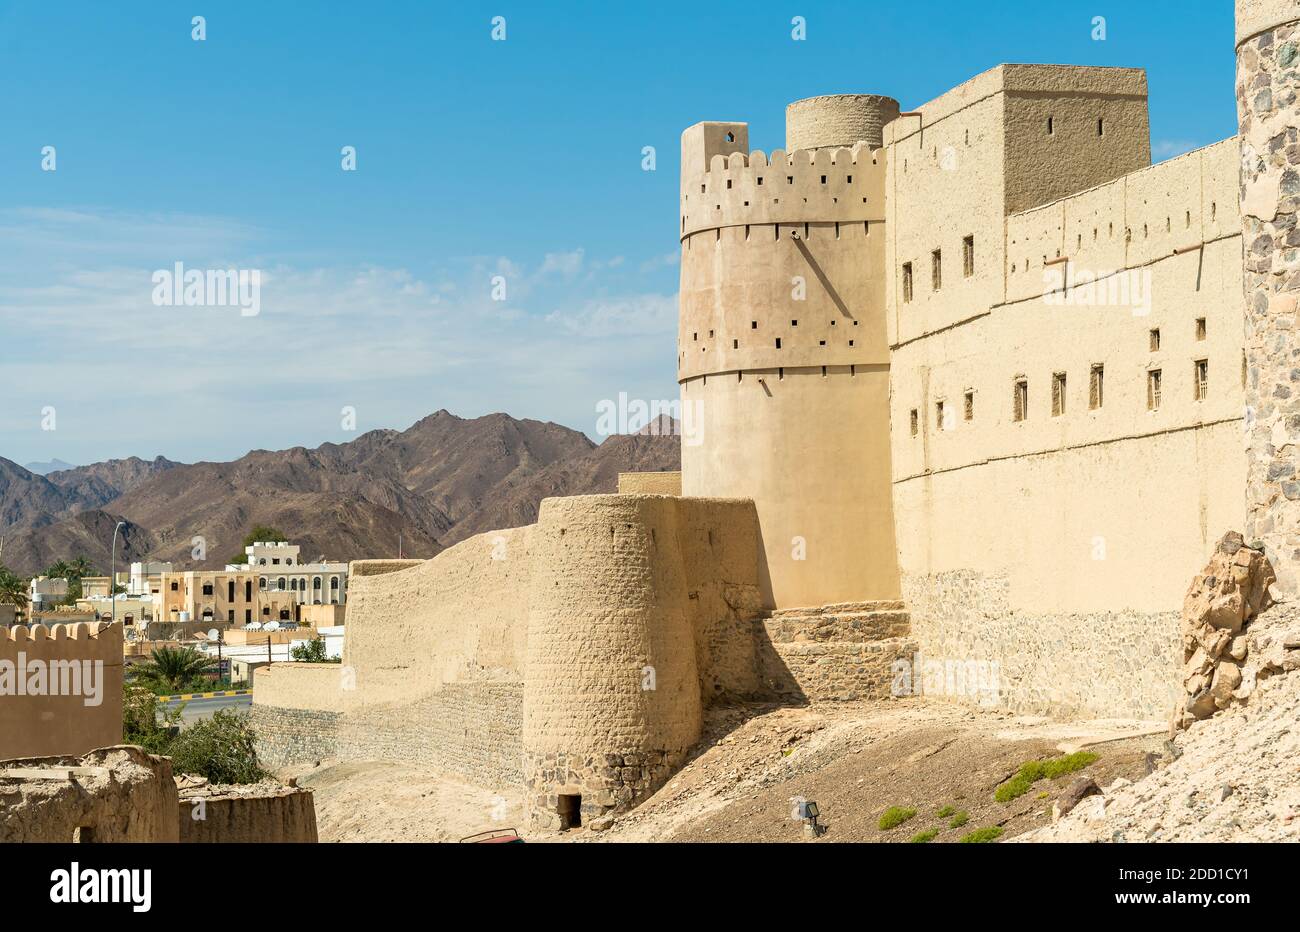 Bahla Fort at the foot of the Djebel Akhdar in Sultanate of Oman. Unesco World Heritage Site. Stock Photo